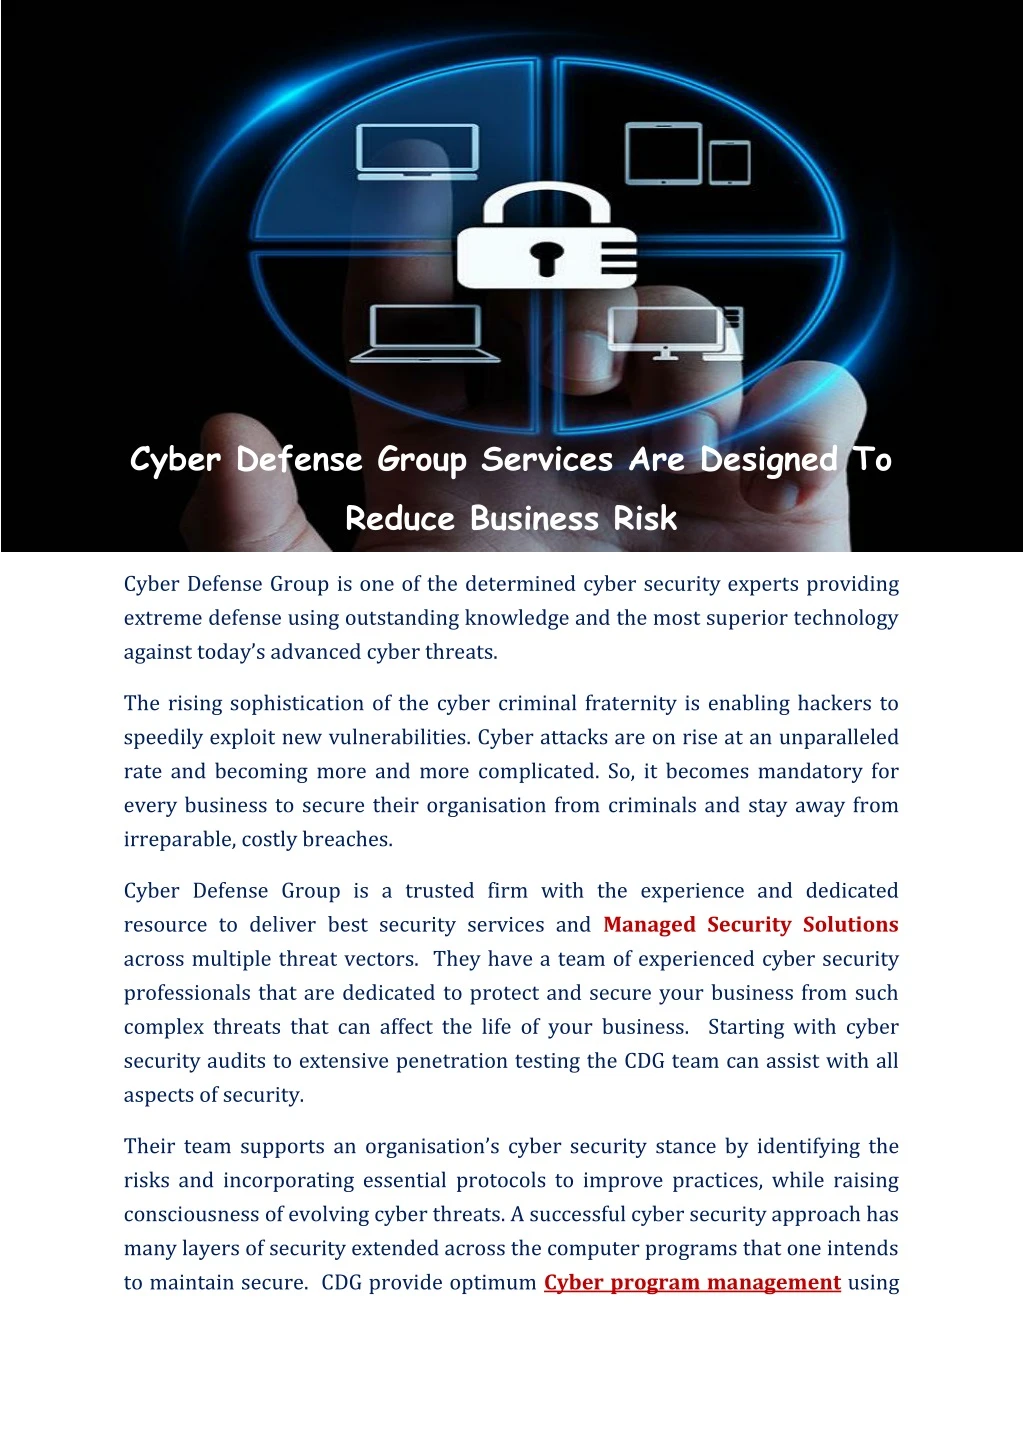 cyber defense group services are designed